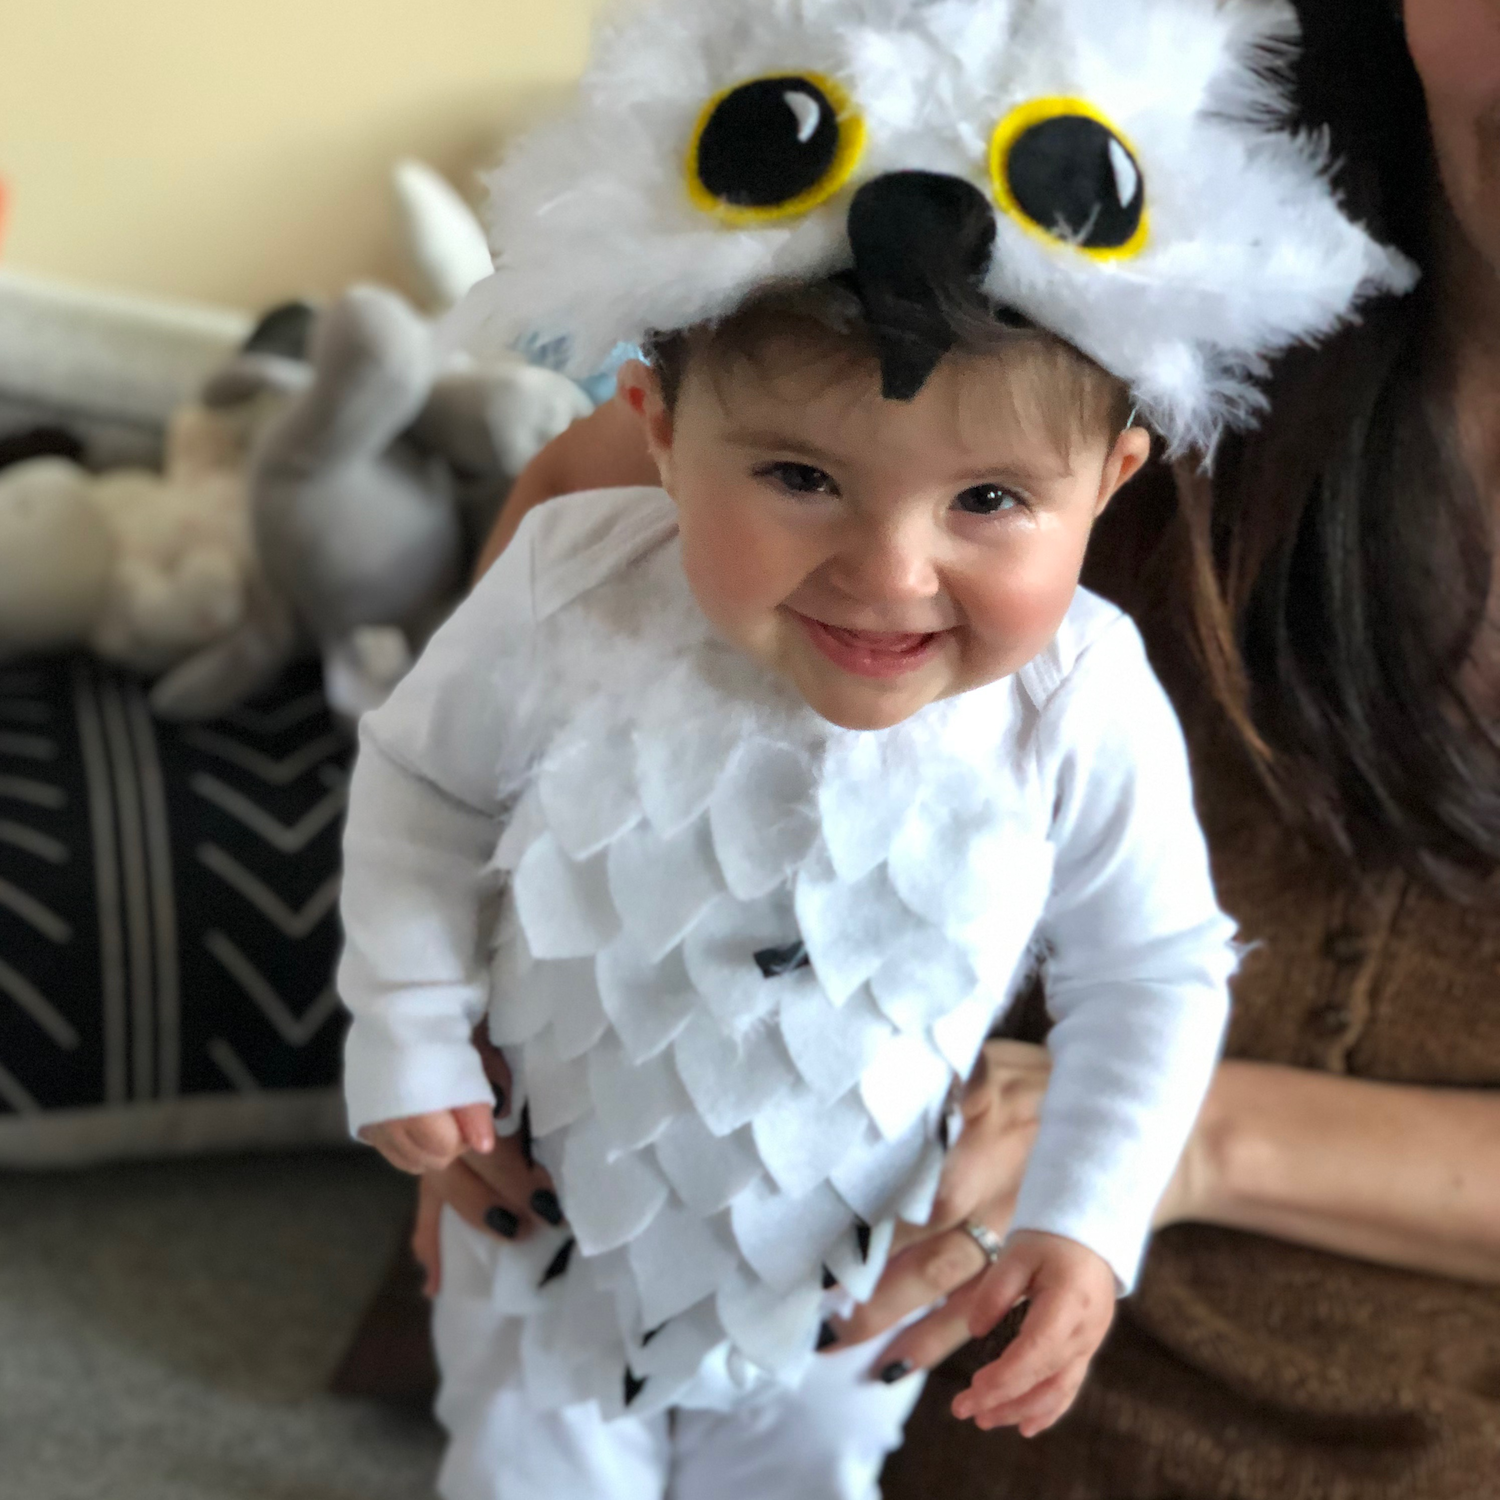 Hedwig the Snowy Owl (from Harry Potter): A child wearing a white outfit with white feathers and a headwig inspired hedband